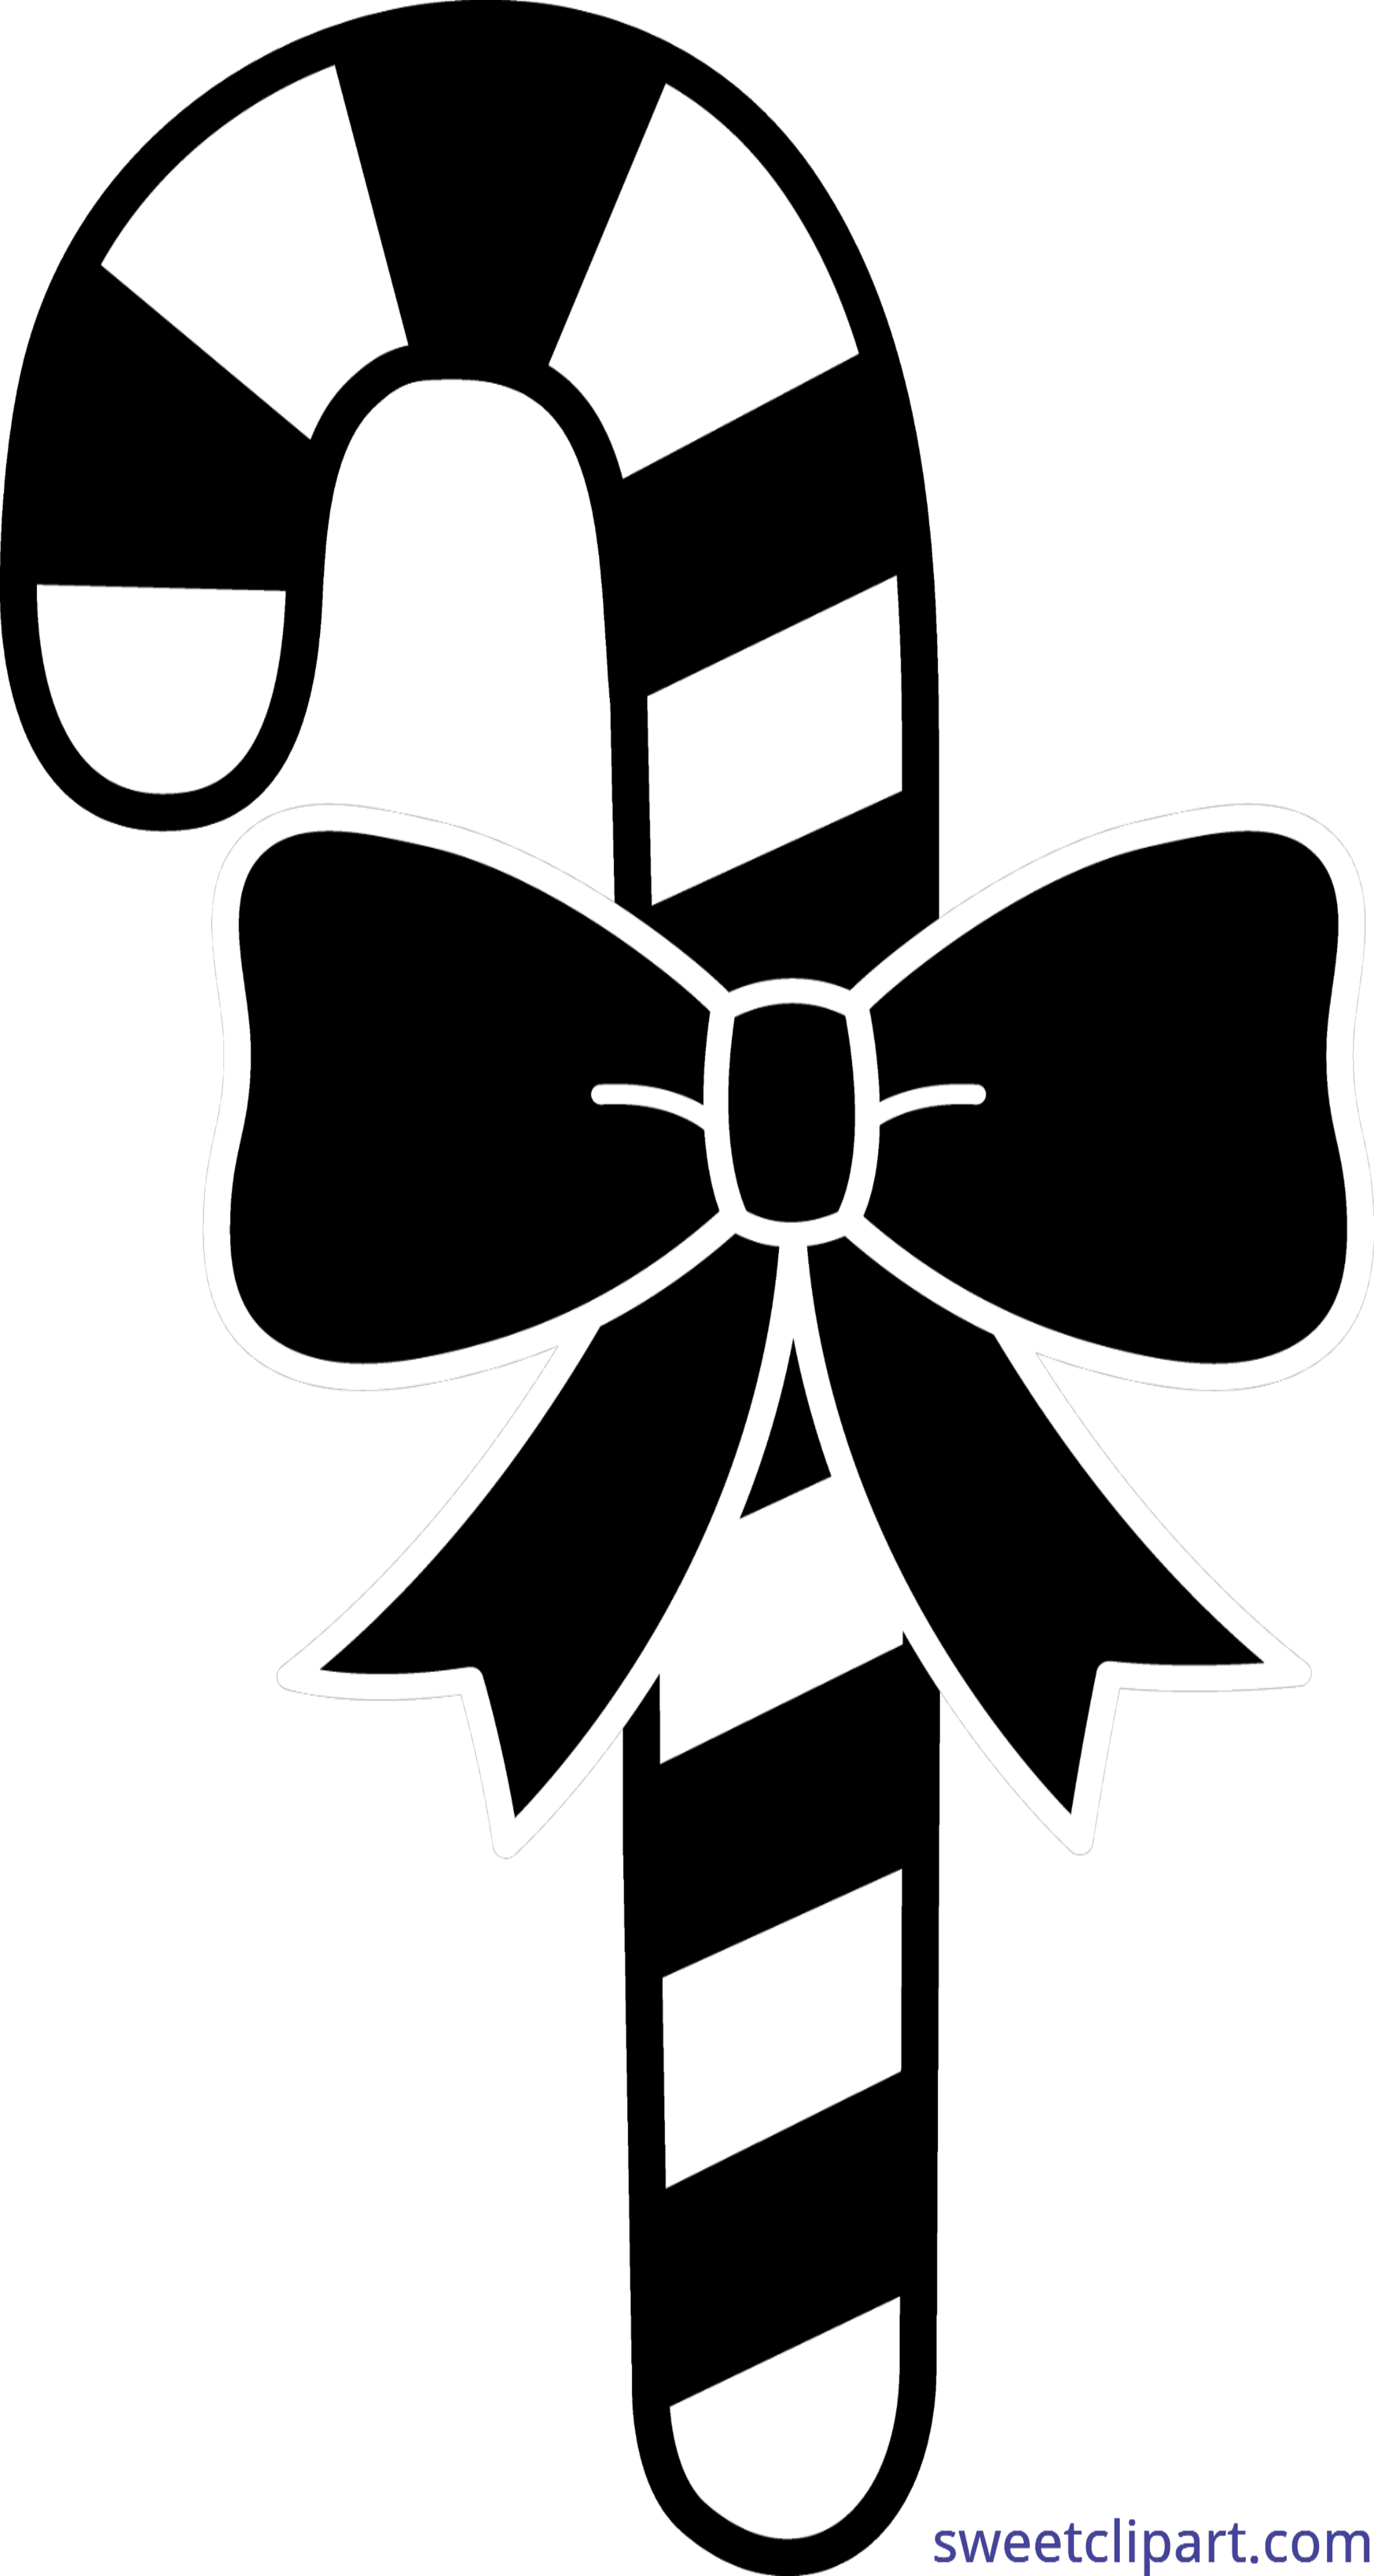 Cane cilpart cool black. Clipart candy bow